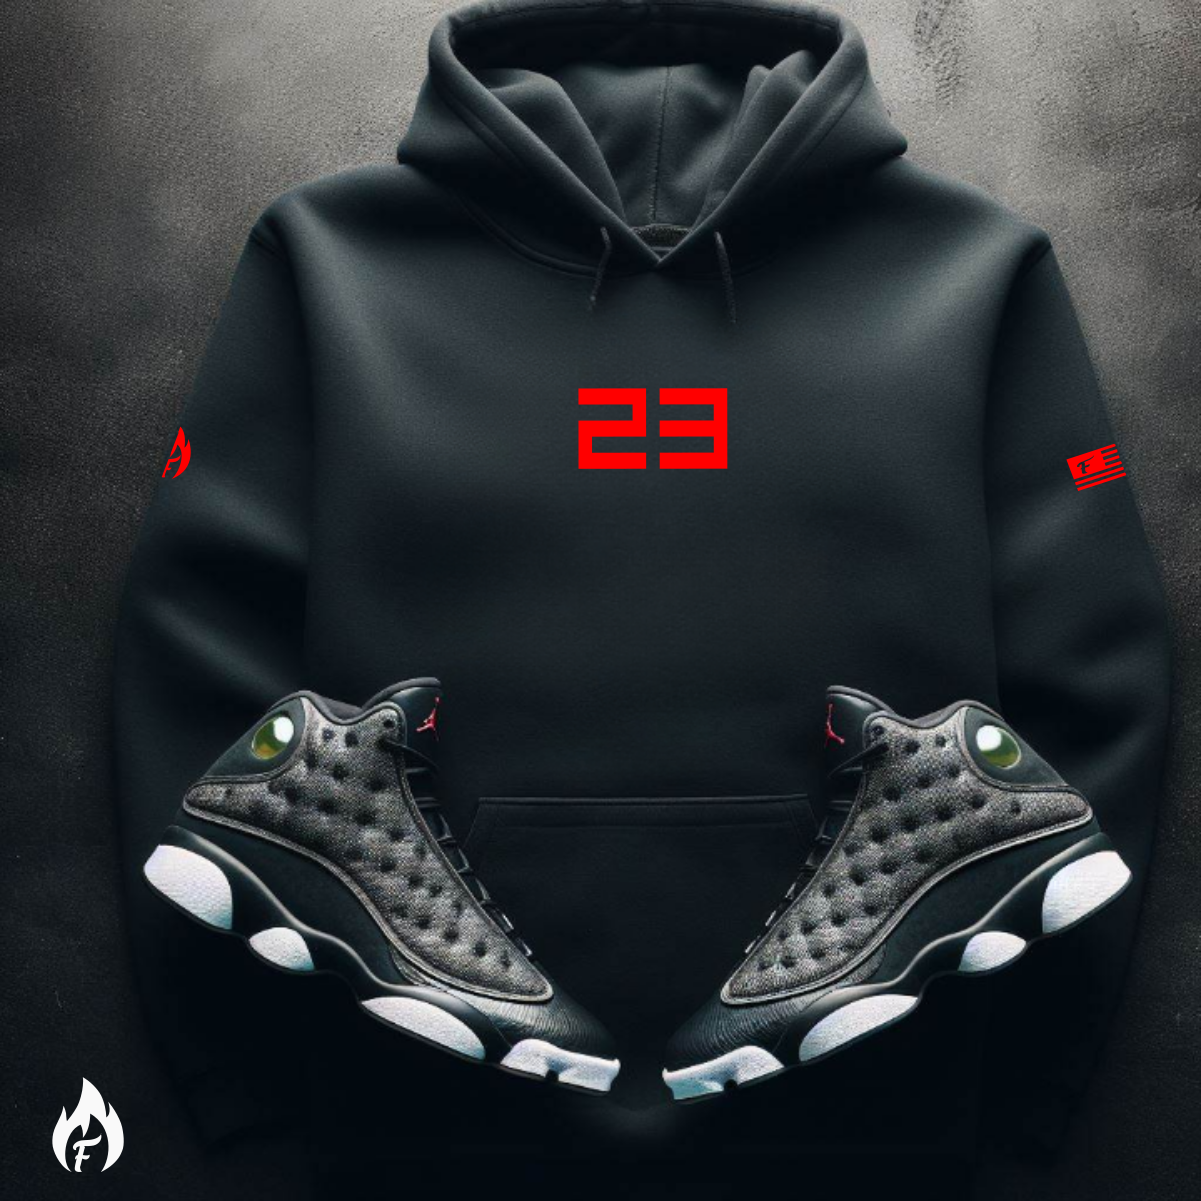 23 Tracksuit To Match Retro 13 Breds Black Red 23 Hoodie Joggers Set